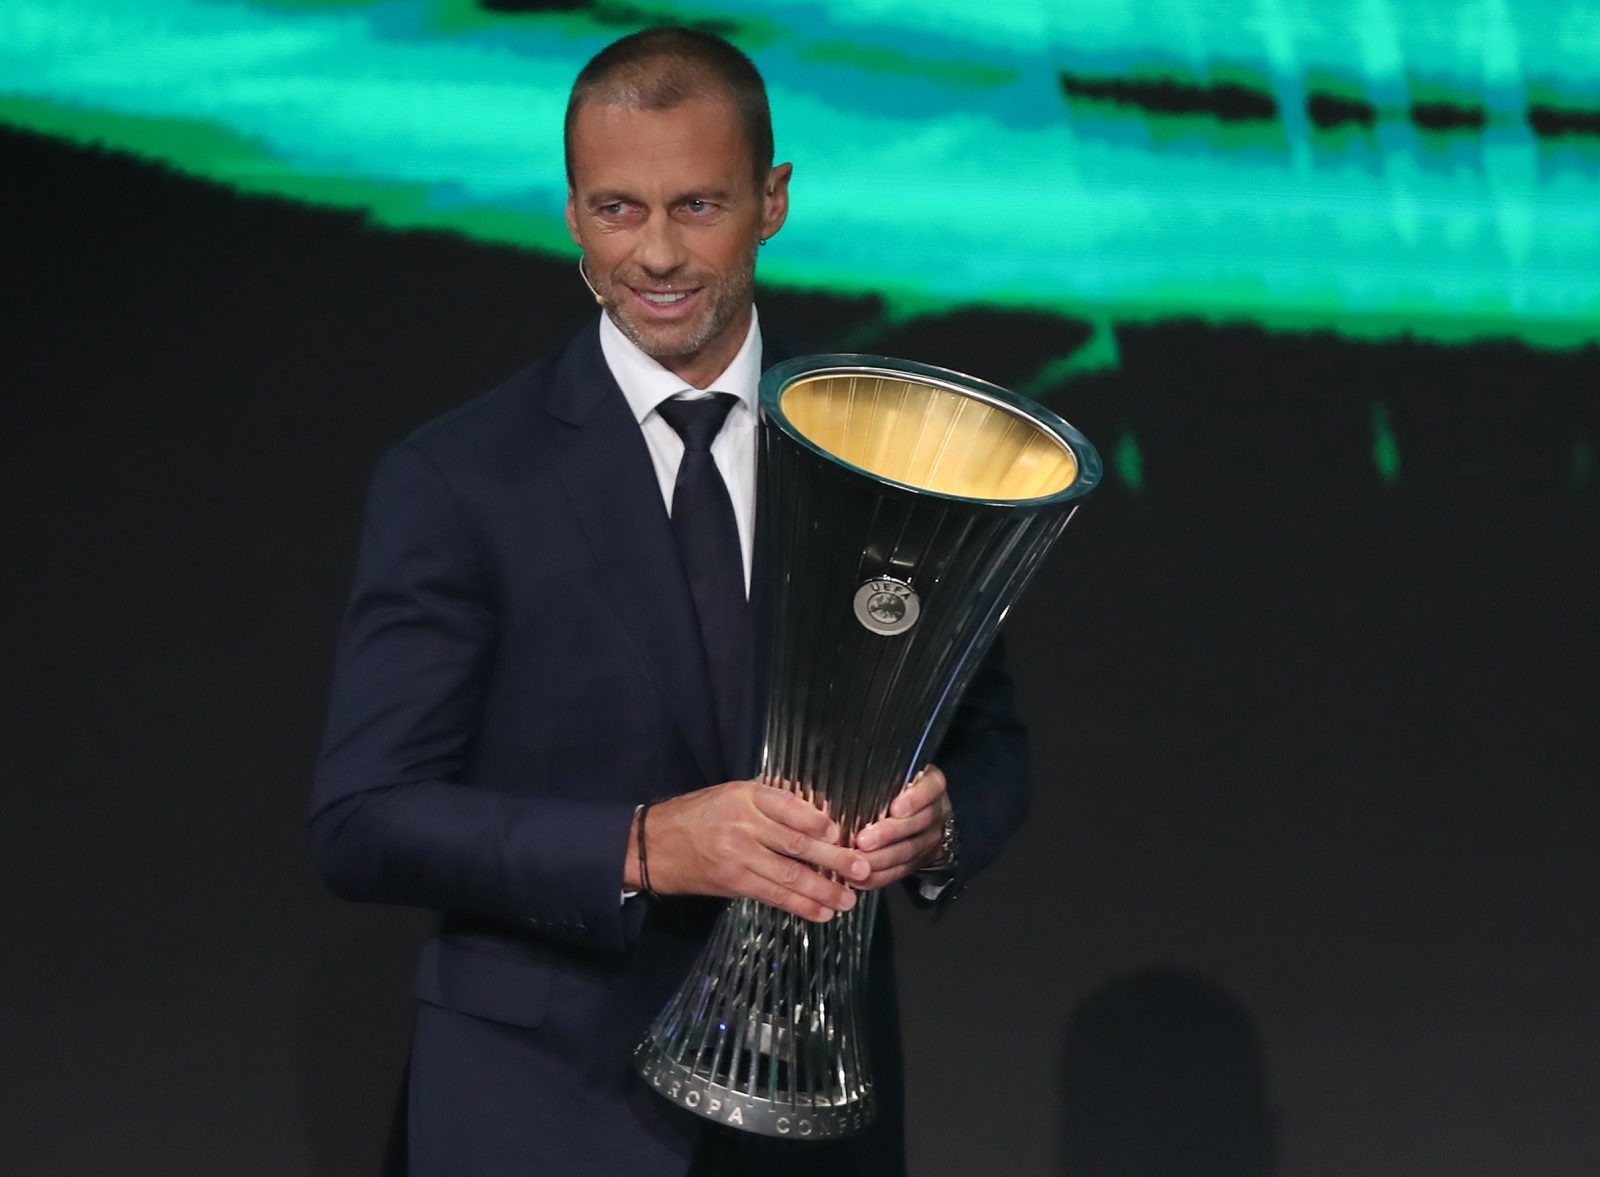 epa09431999 UEFA president Aleksander Ceferin carries the UEFA Europa Conference League trophy the UEFA Draw and Awards Ceremony at the Halic Congress Center in Istanbul, Turkey, 27 August 2021.  EPA/TOLGA BOZOGLU